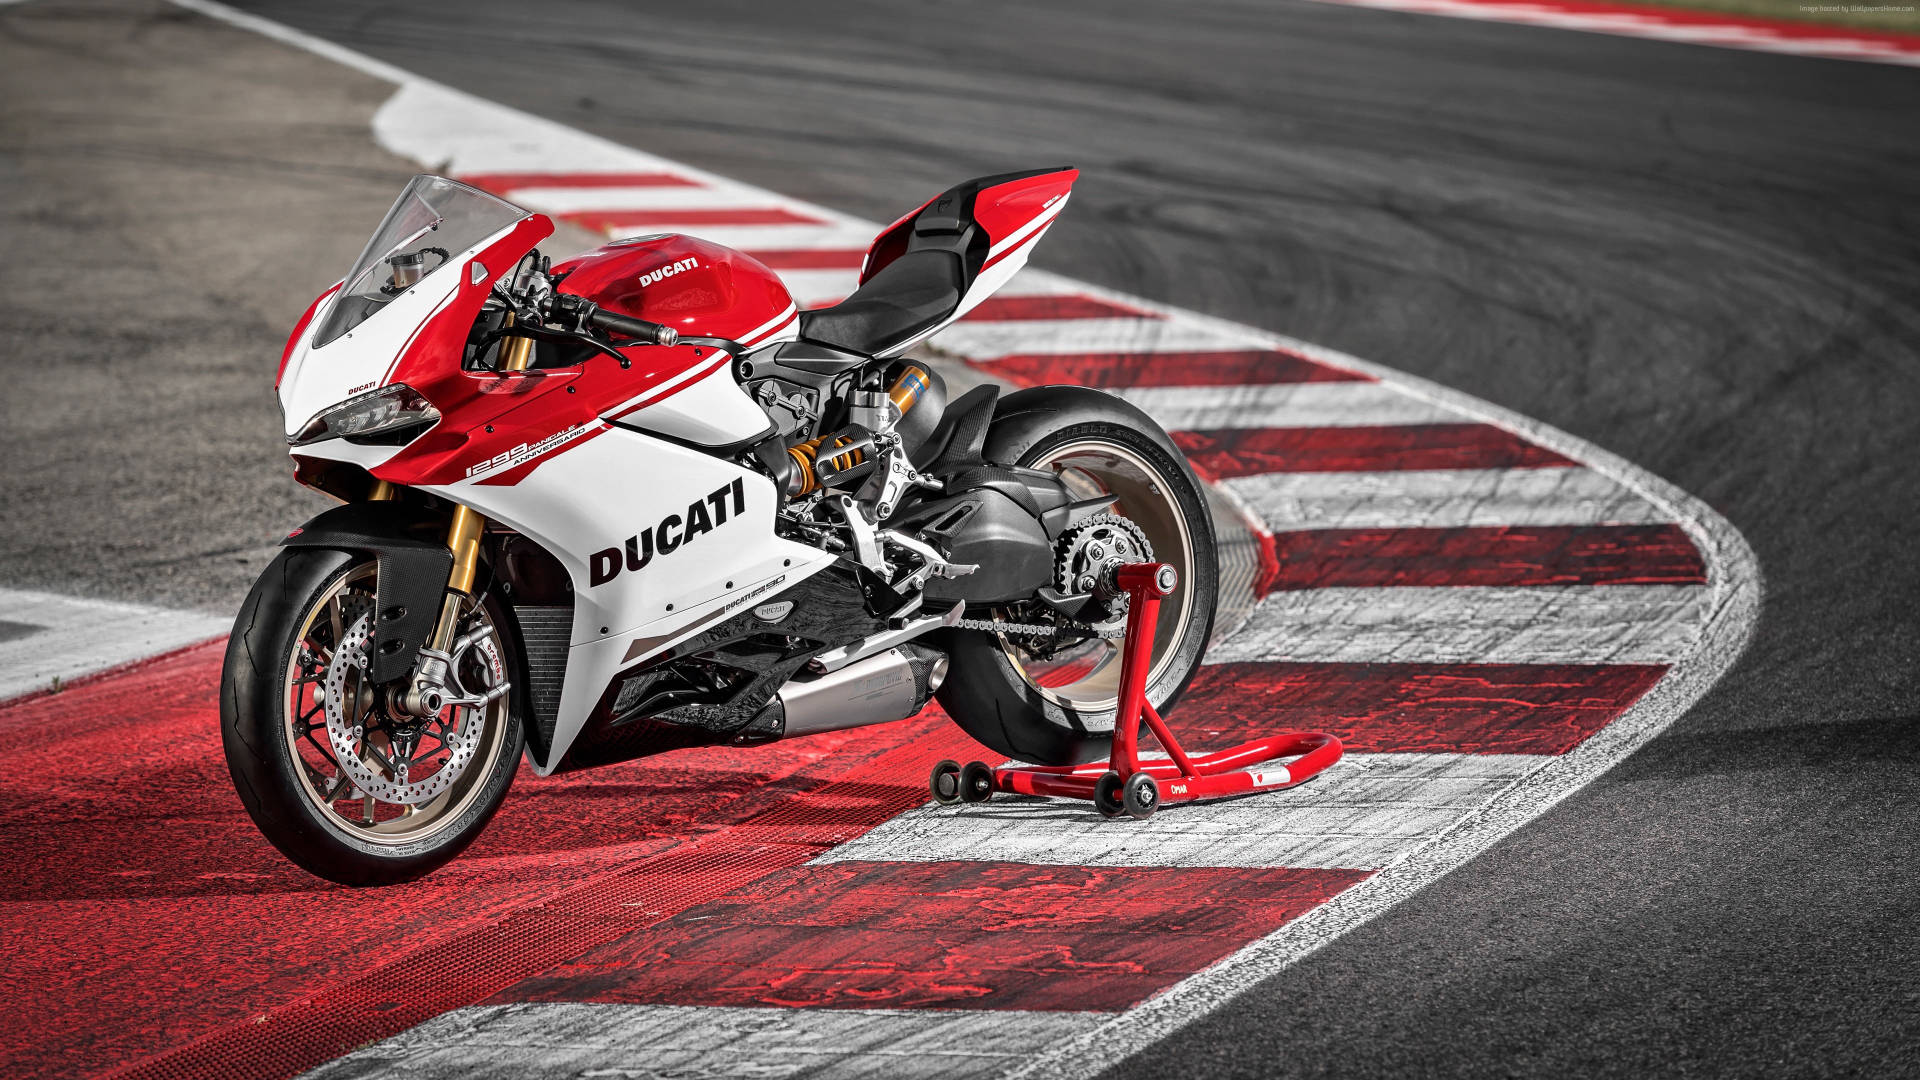 Conquer The Open Roads On The Red Ducati 1299 Panigale R Final Edition Motorcycle